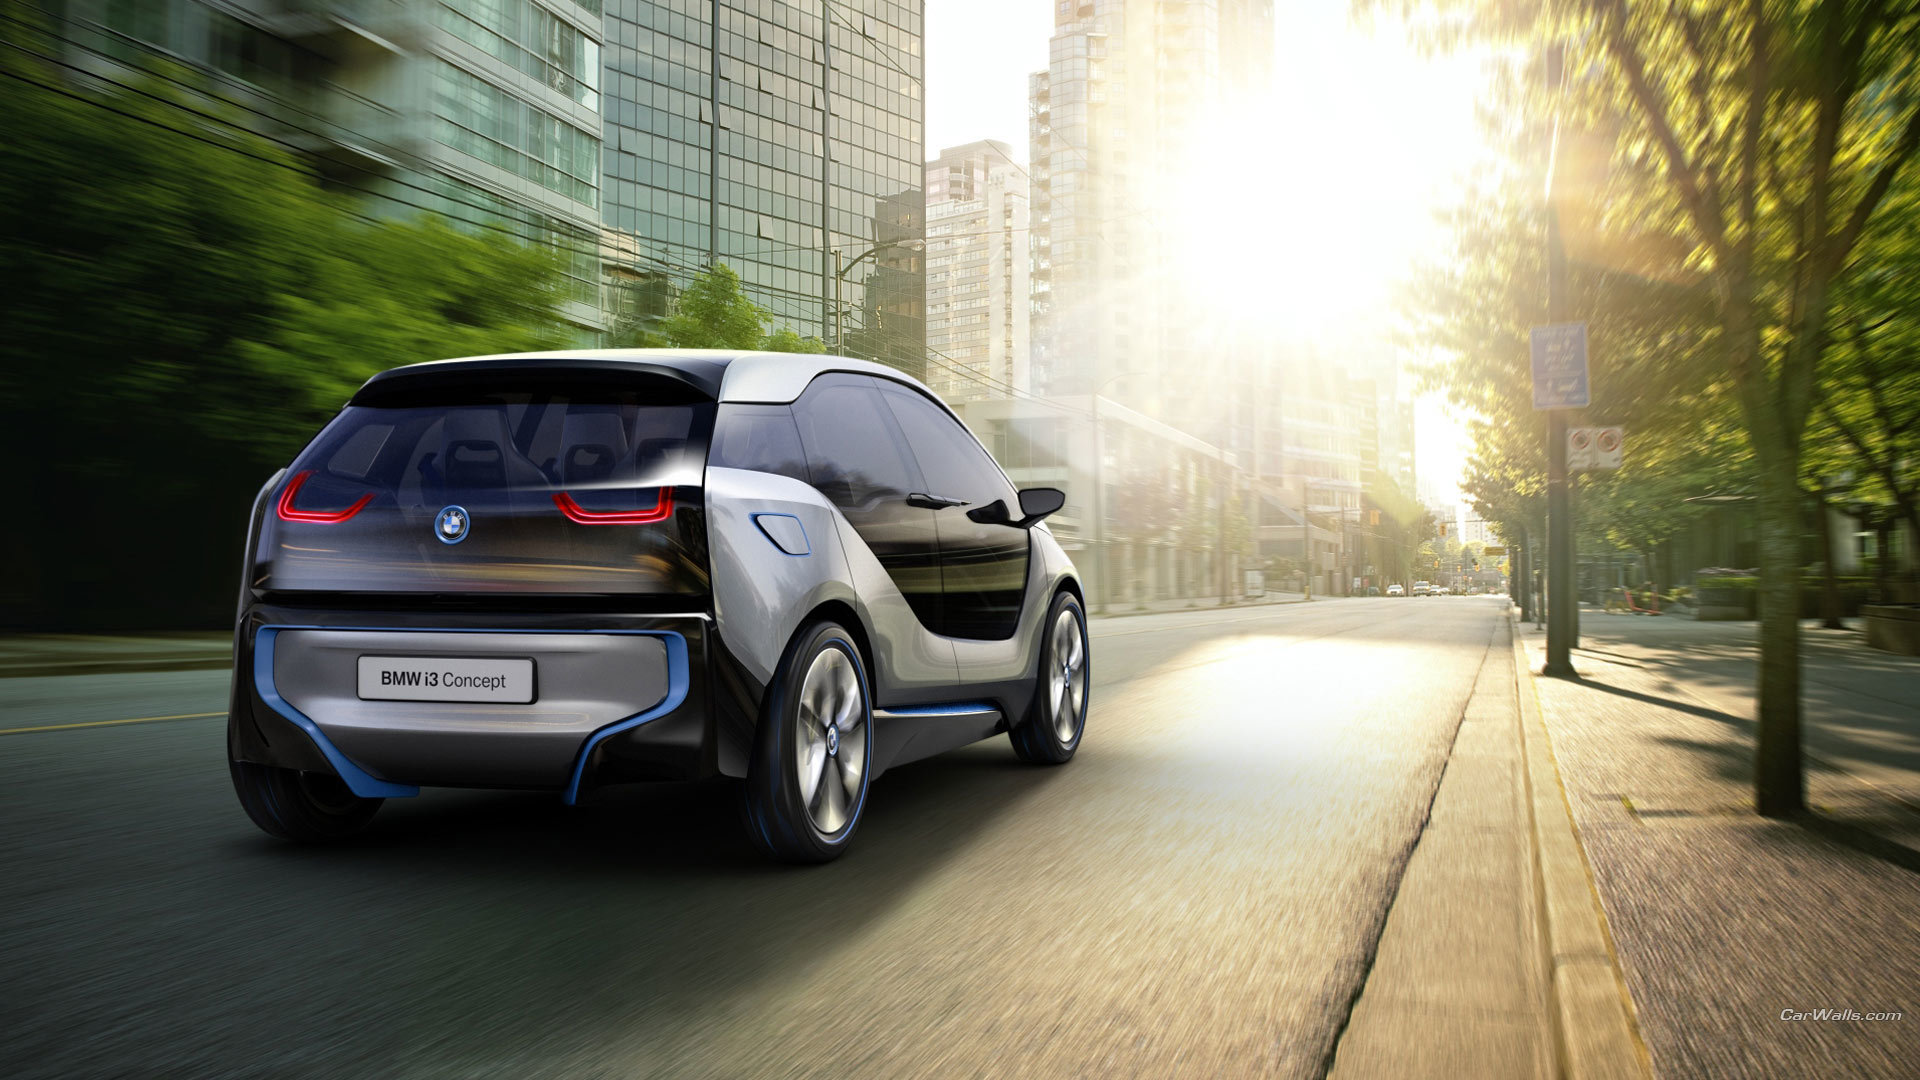 High resolution BMW I3 Concept full hd 1080p background ID:118538 for desktop